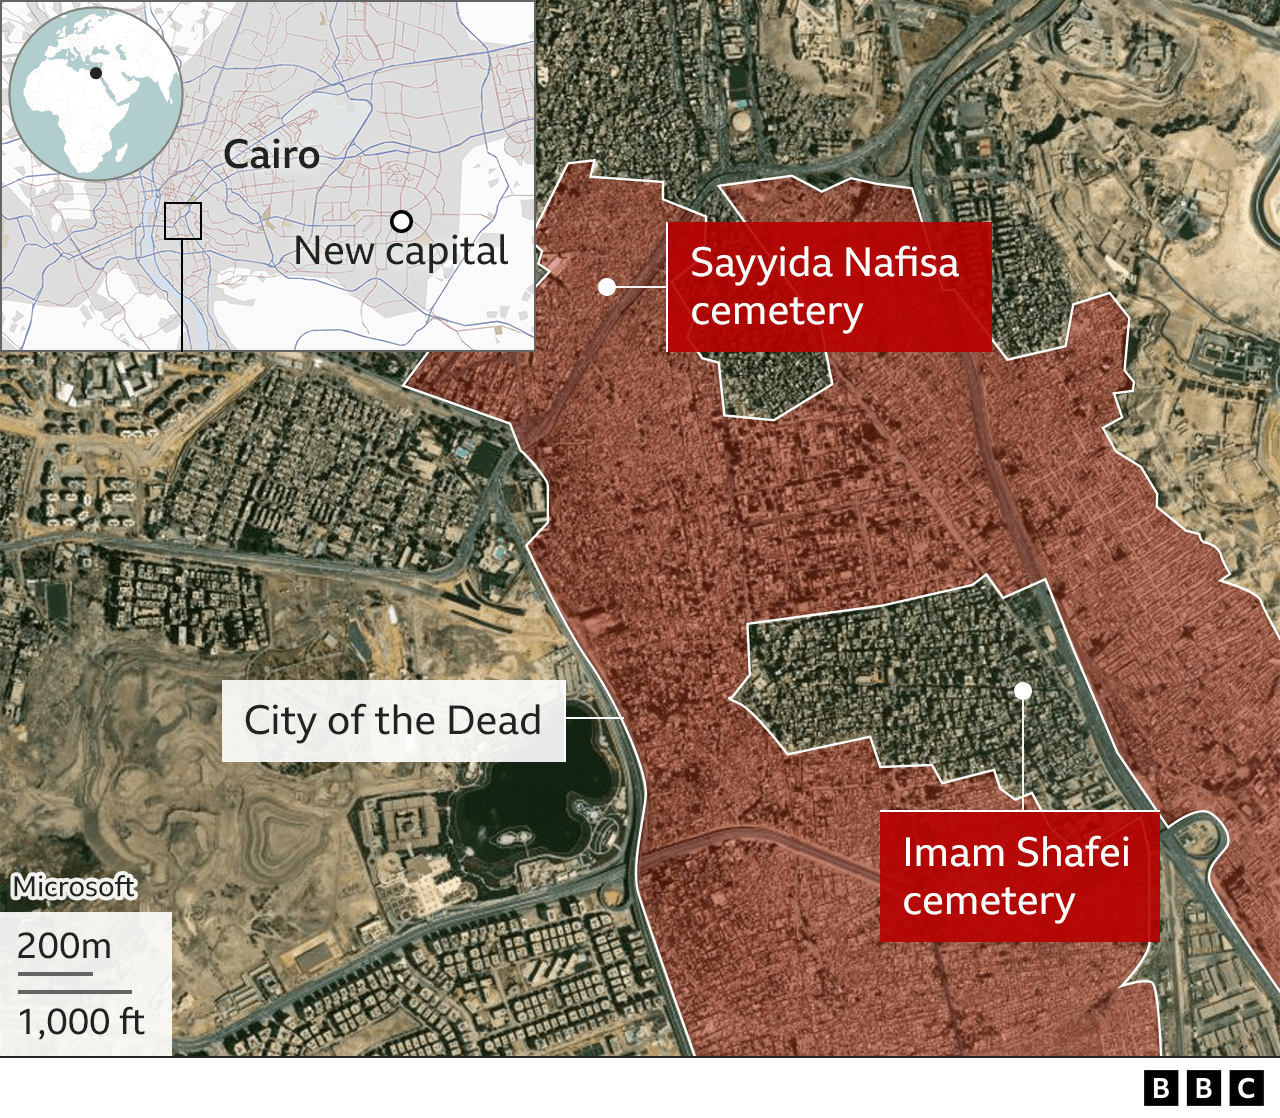 Map showing part of Cairo’s City of the Dead and the locations of the Sayyida Nafisa and Imam Shafei cemeteries, and where they are in relation to the new capital